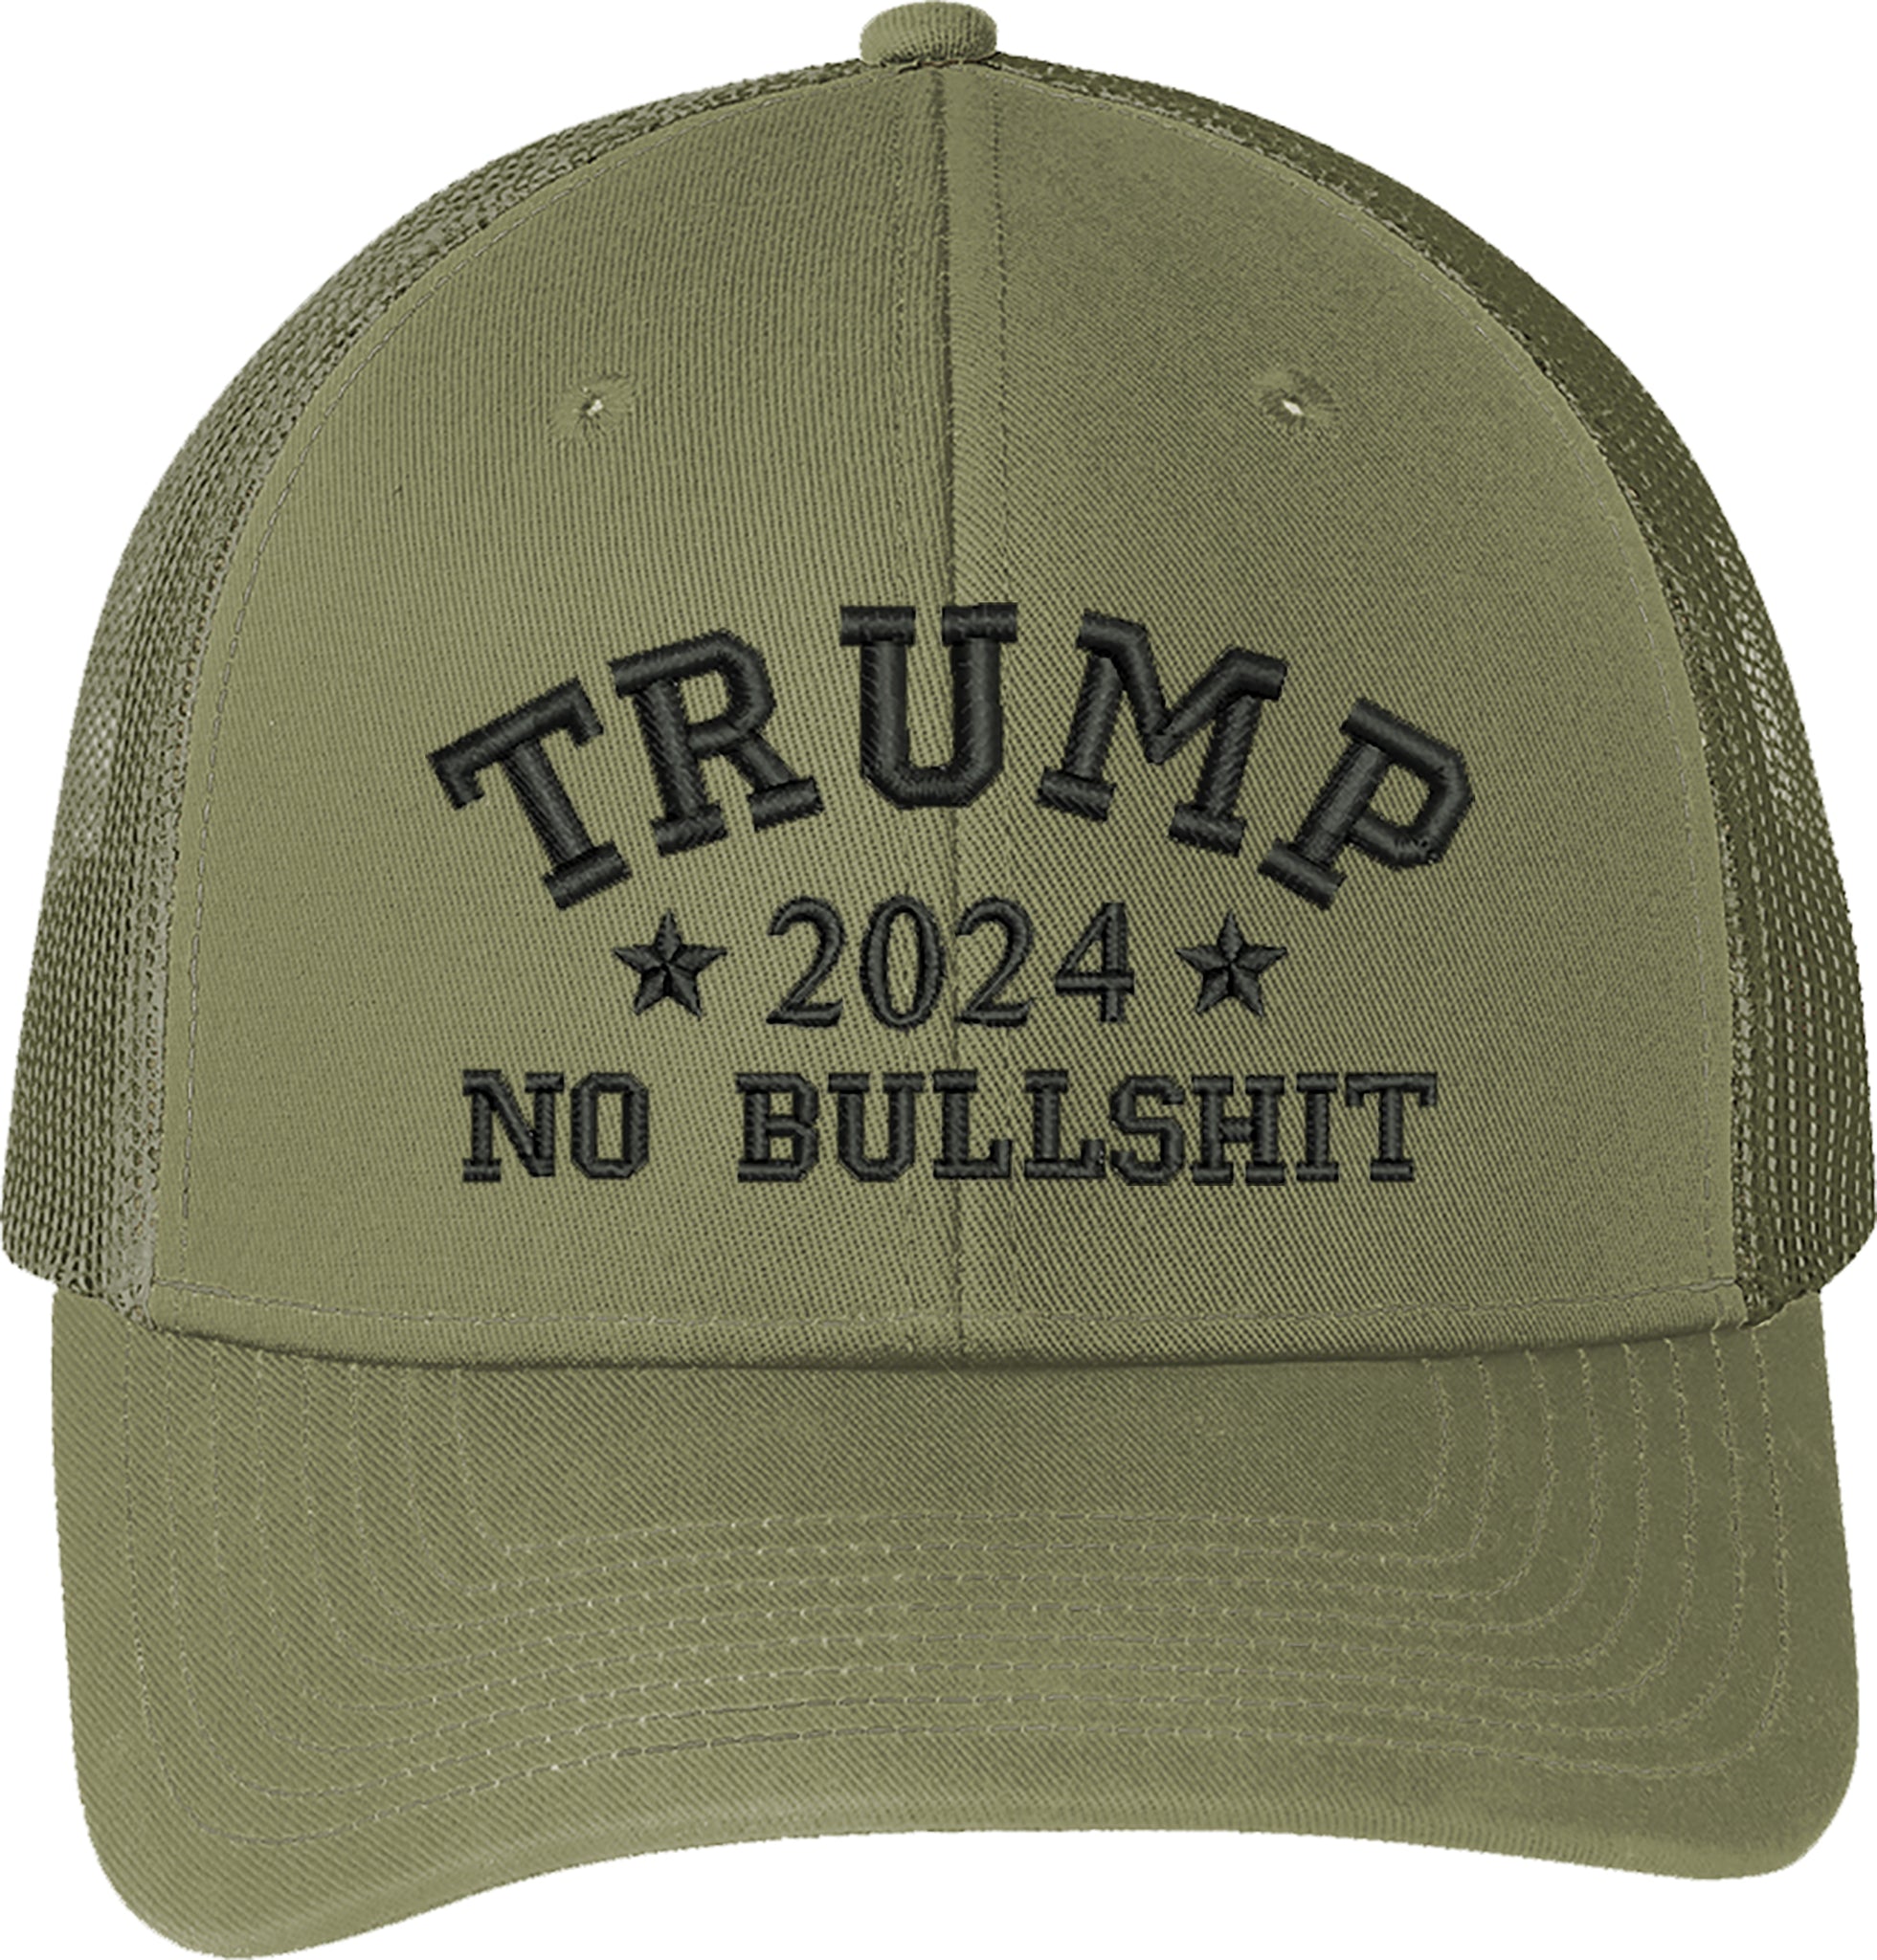 Trump 2024 1Color No Bullshit Embroidered Trucker Structured Adjustable One Size Fits All Hat